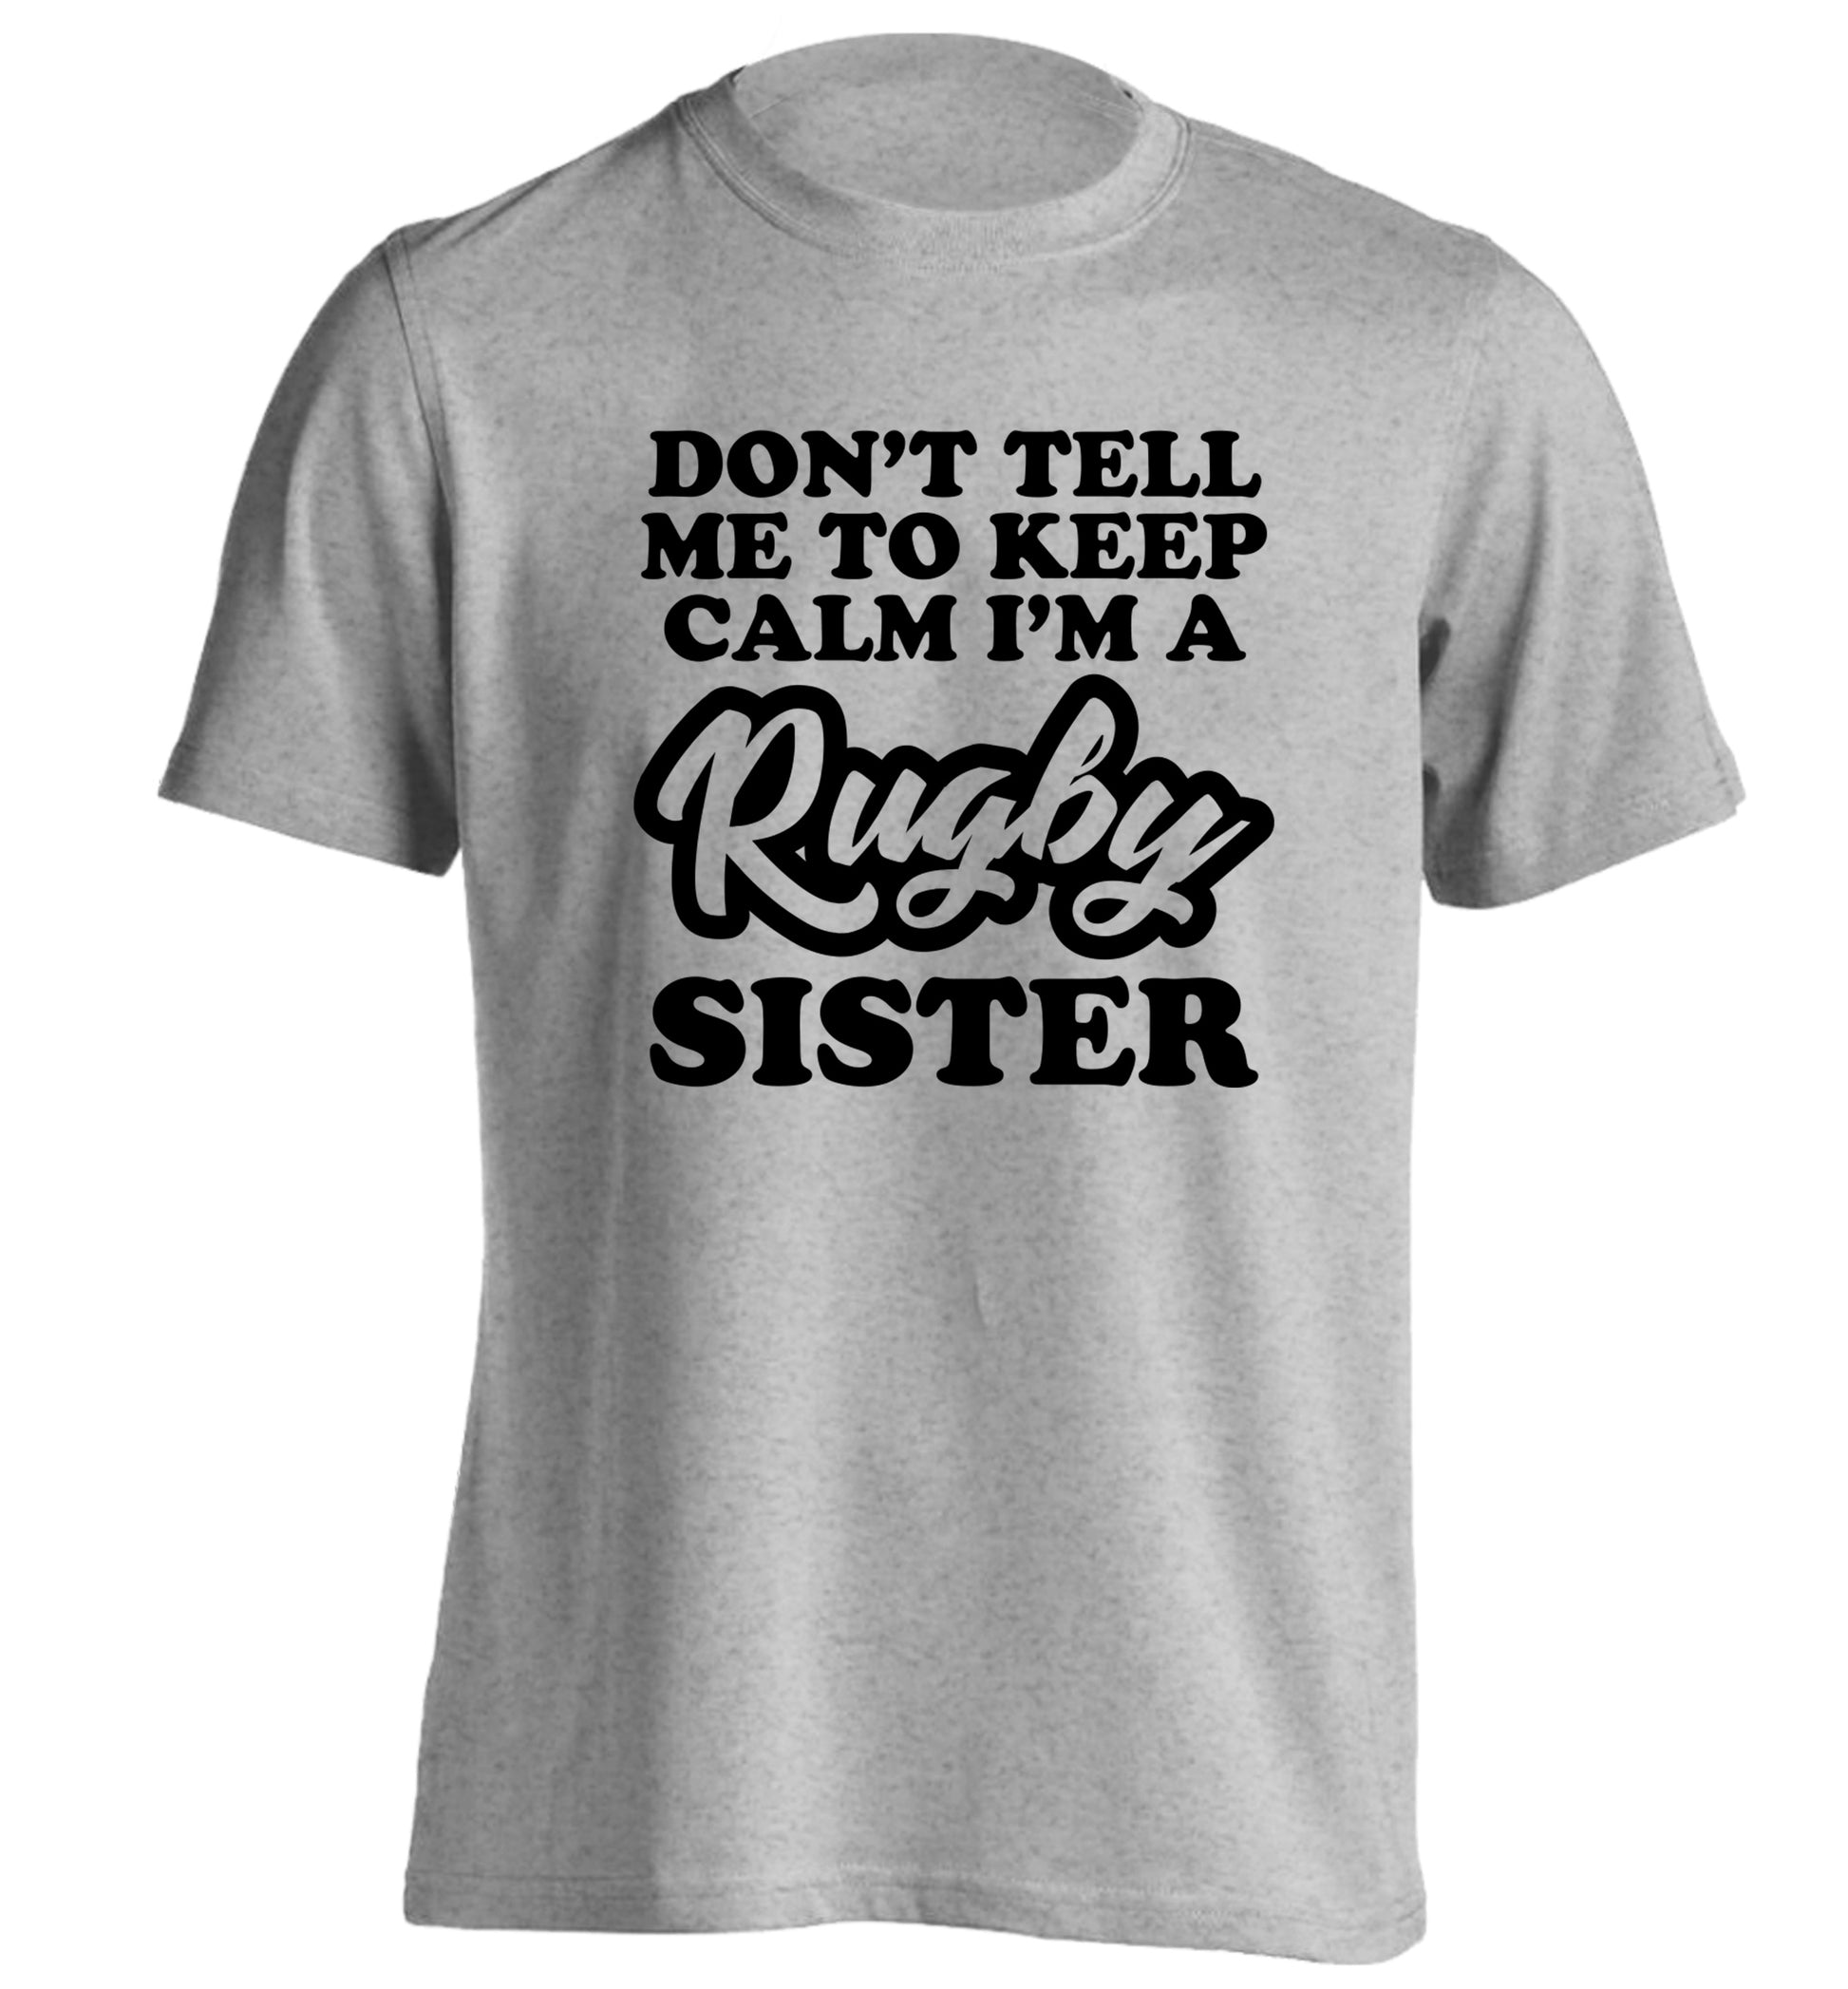 Don't tell me keep calm I'm a rugby sister adults unisex grey Tshirt 2XL